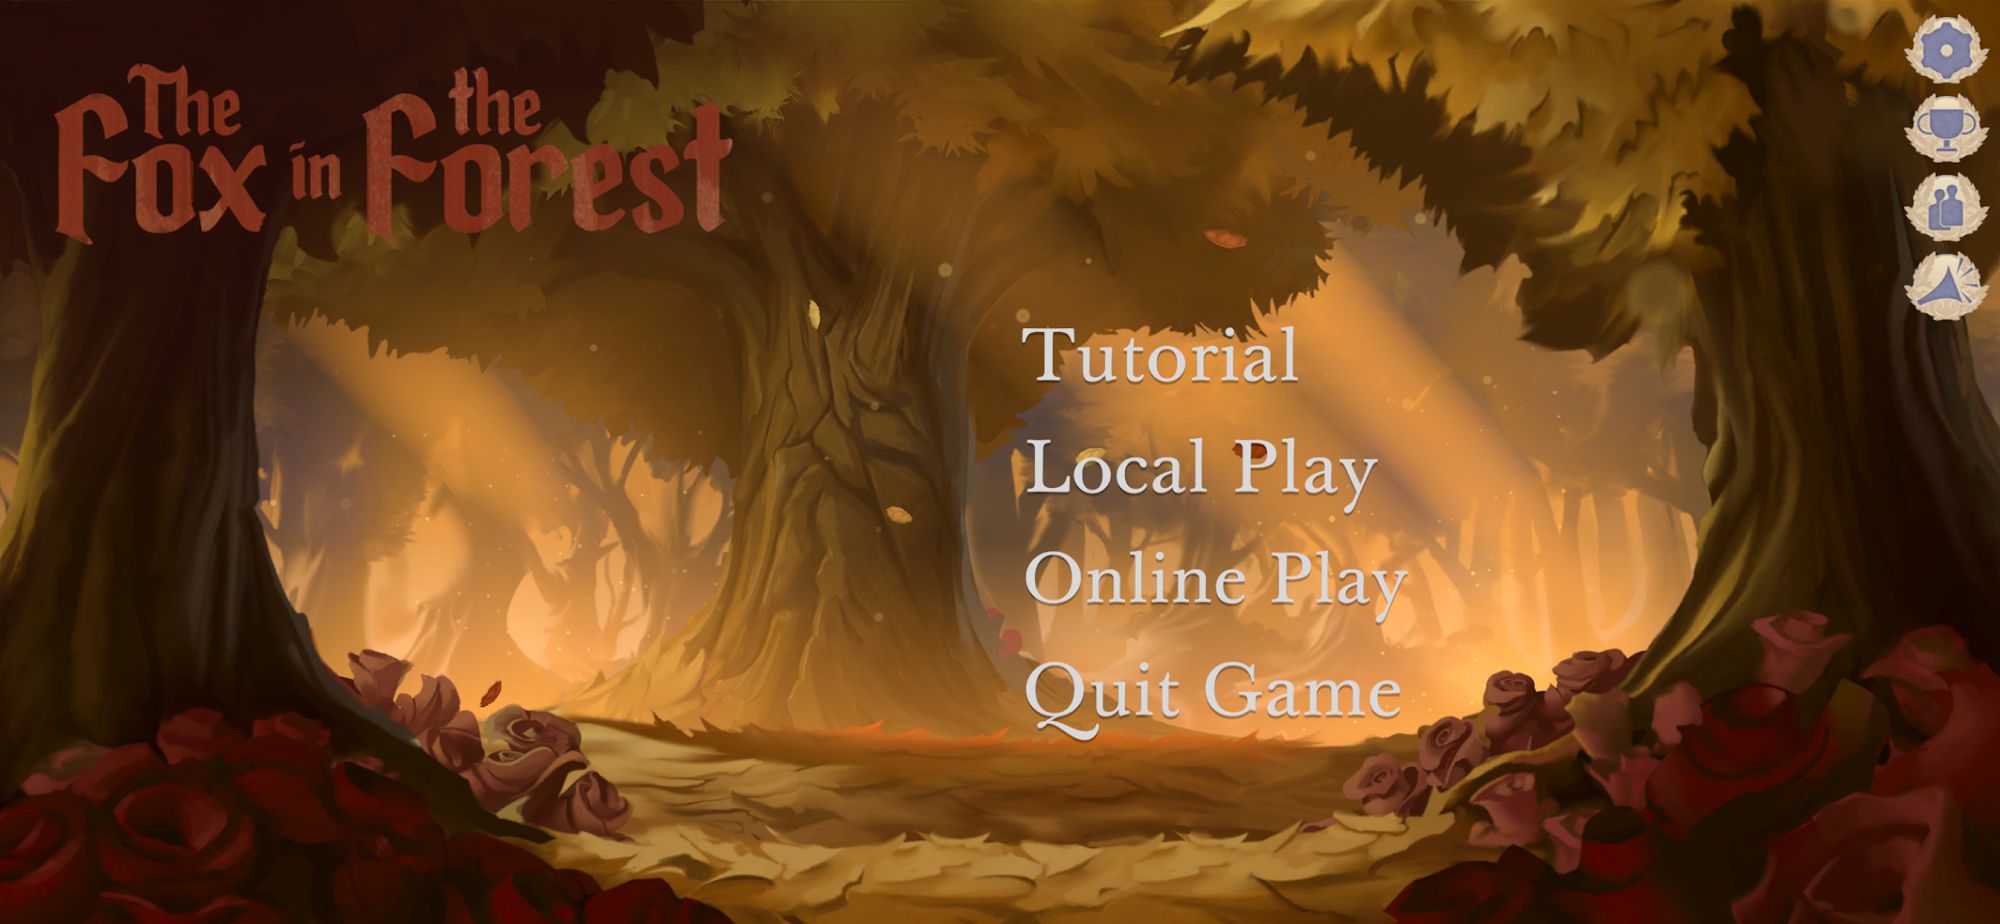 Descargar The Fox in the Forest gratis para Android.